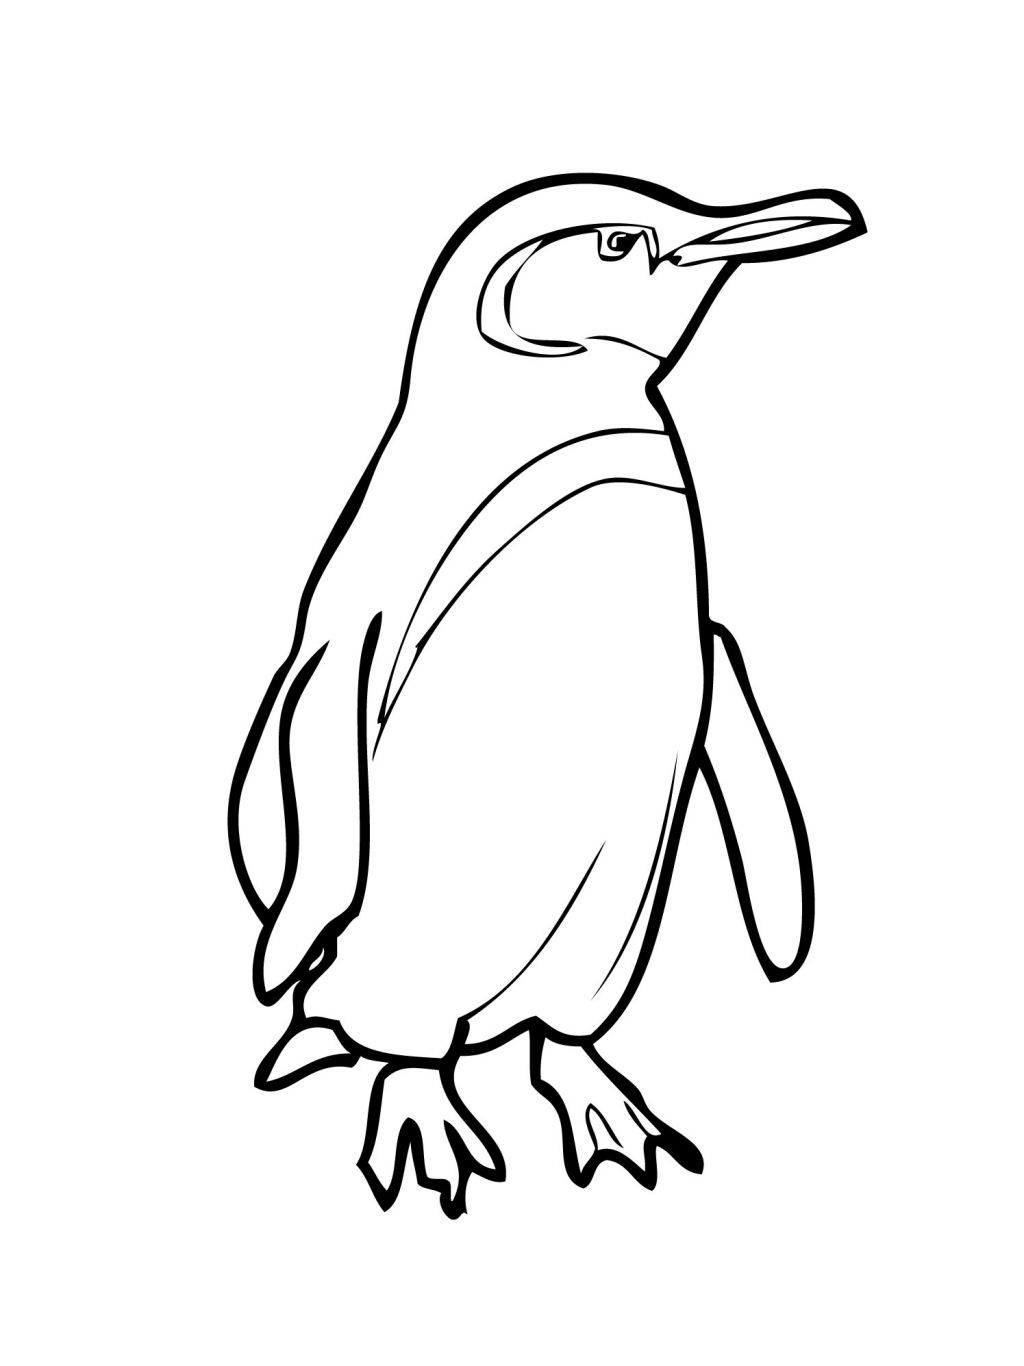 Penguin printable coloring pages - Coloring Pages & Pictures - IMAGIXS